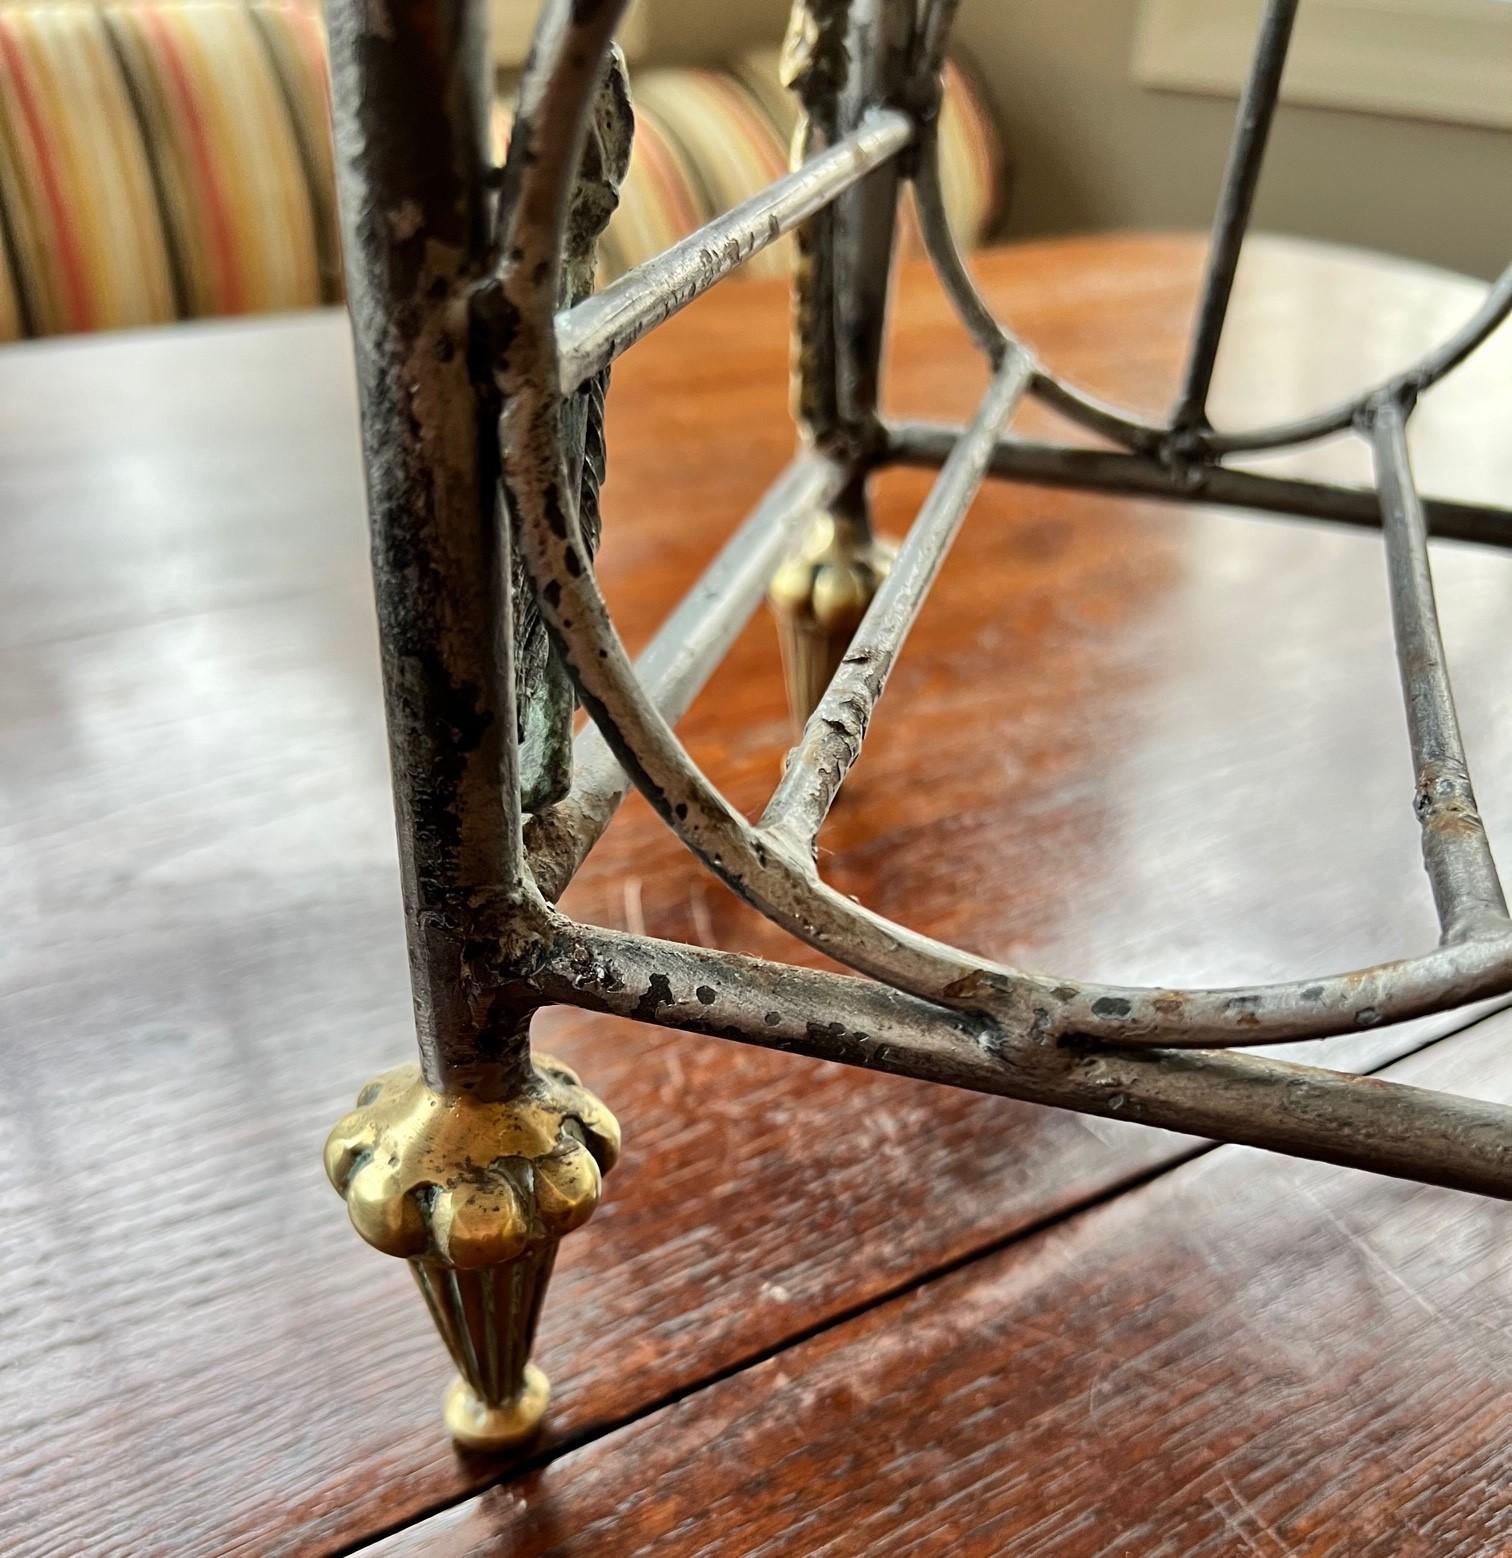 Vintage 13 Bottle Metal Wine Rack with Brass Equestrian Accents In Good Condition For Sale In Morristown, NJ